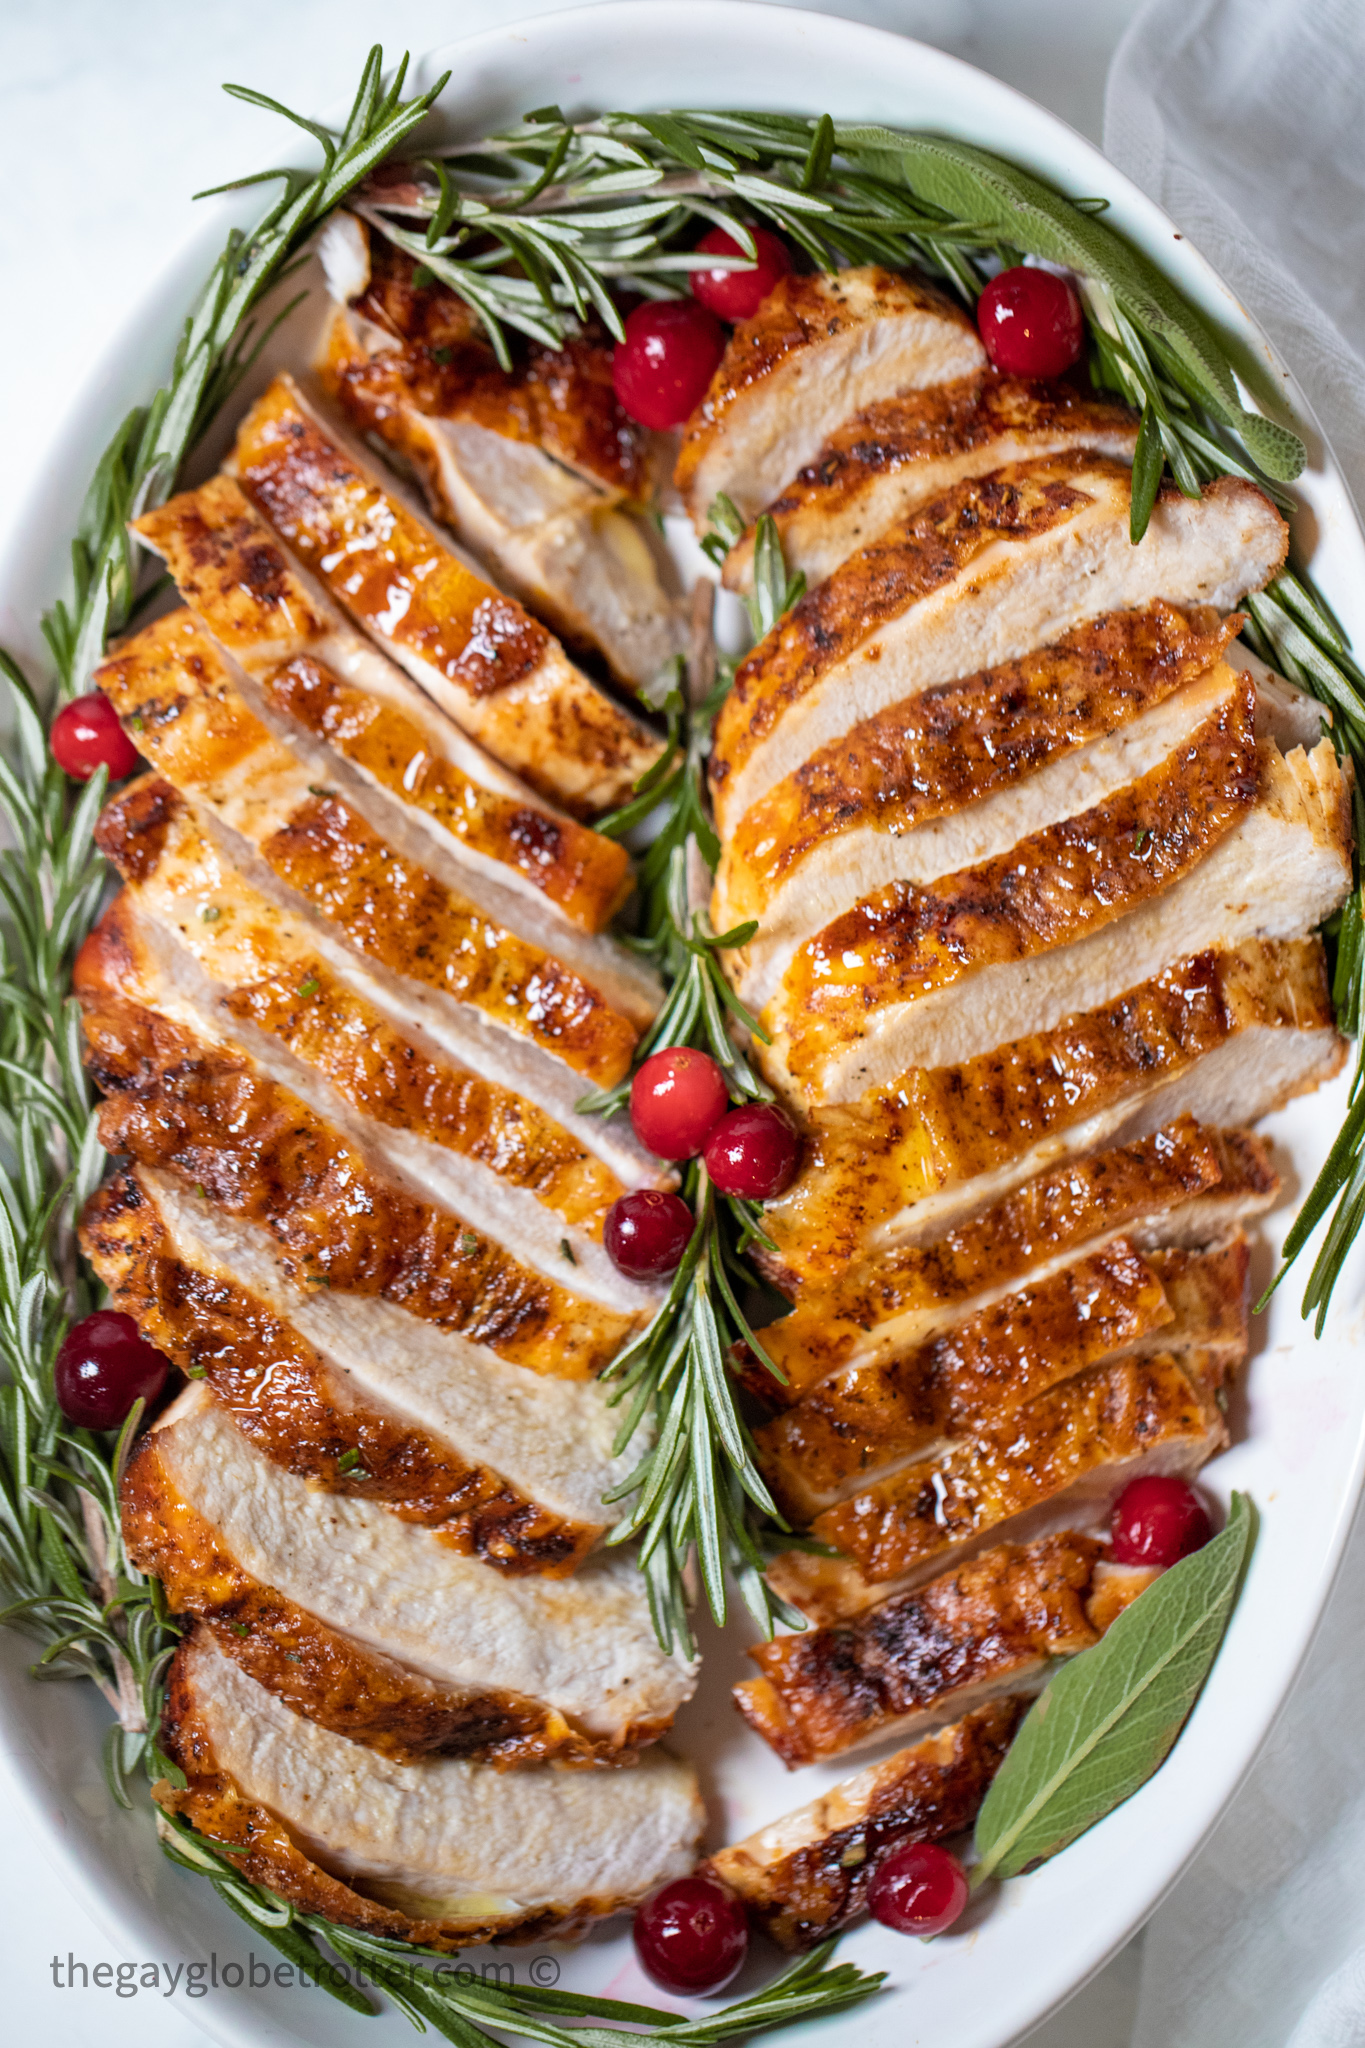 Sliced turkey breast on a serving plate garnished with rosemary.